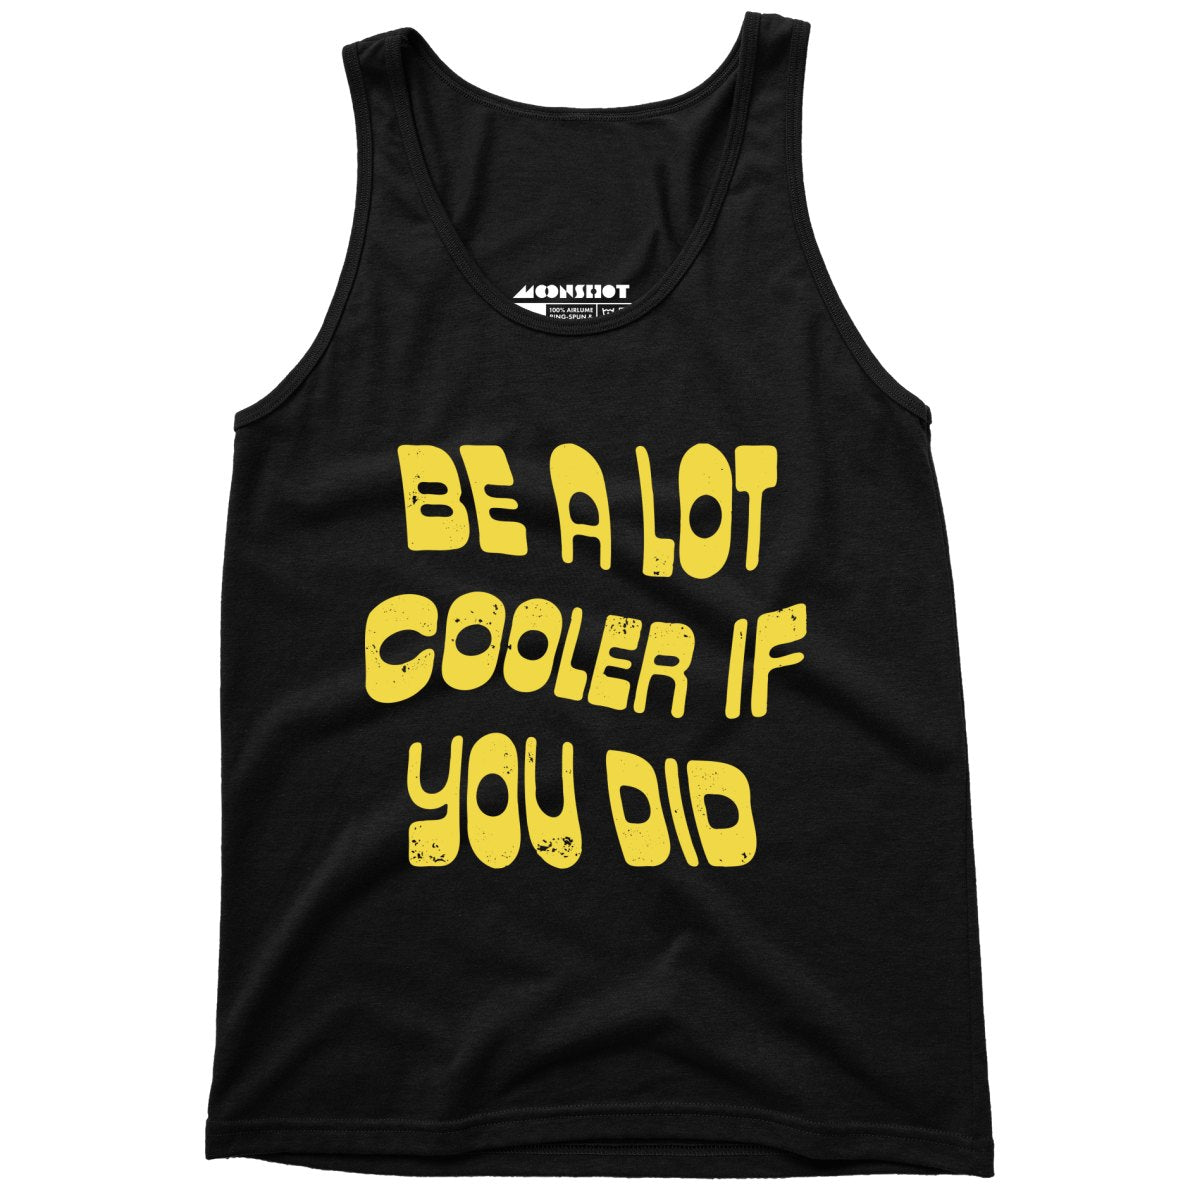 Be a Lot Cooler if You Did - Unisex Tank Top - T-Shirt